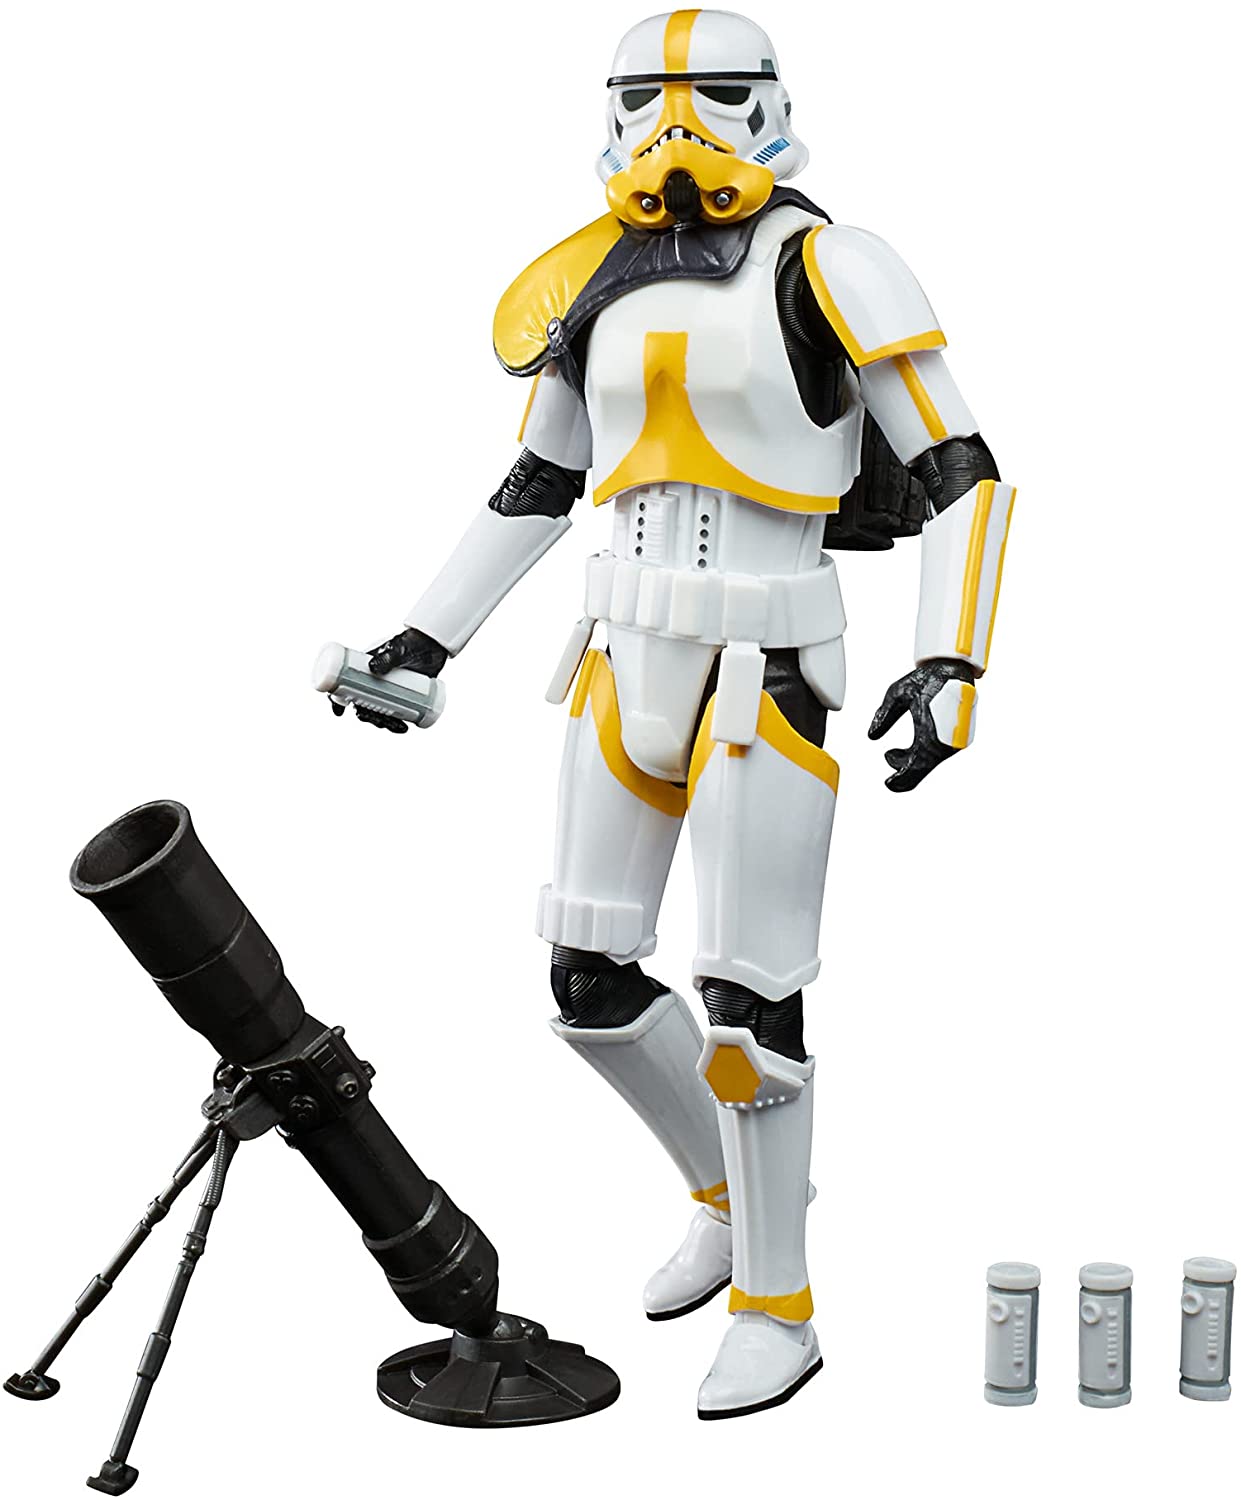 Star Wars The Black Series The Mandalorian Artillery Stormtrooper figure and accessories